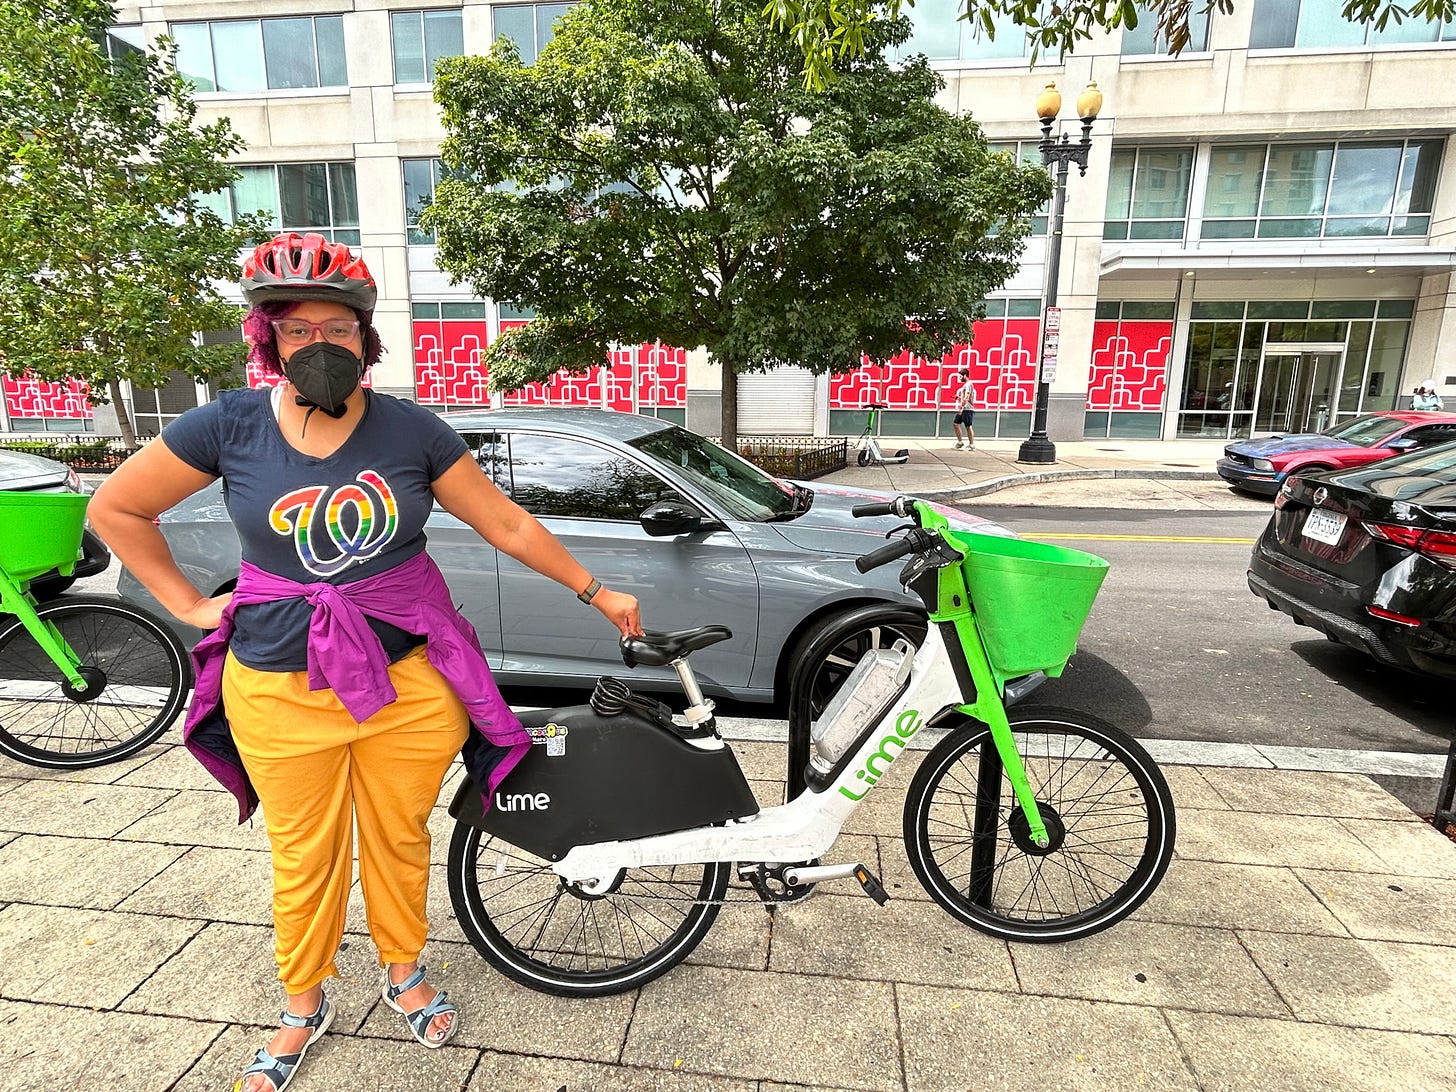 Kristen, masked and with a helmet on, standing next to a Lime e-bike outside in Navy Yard DC